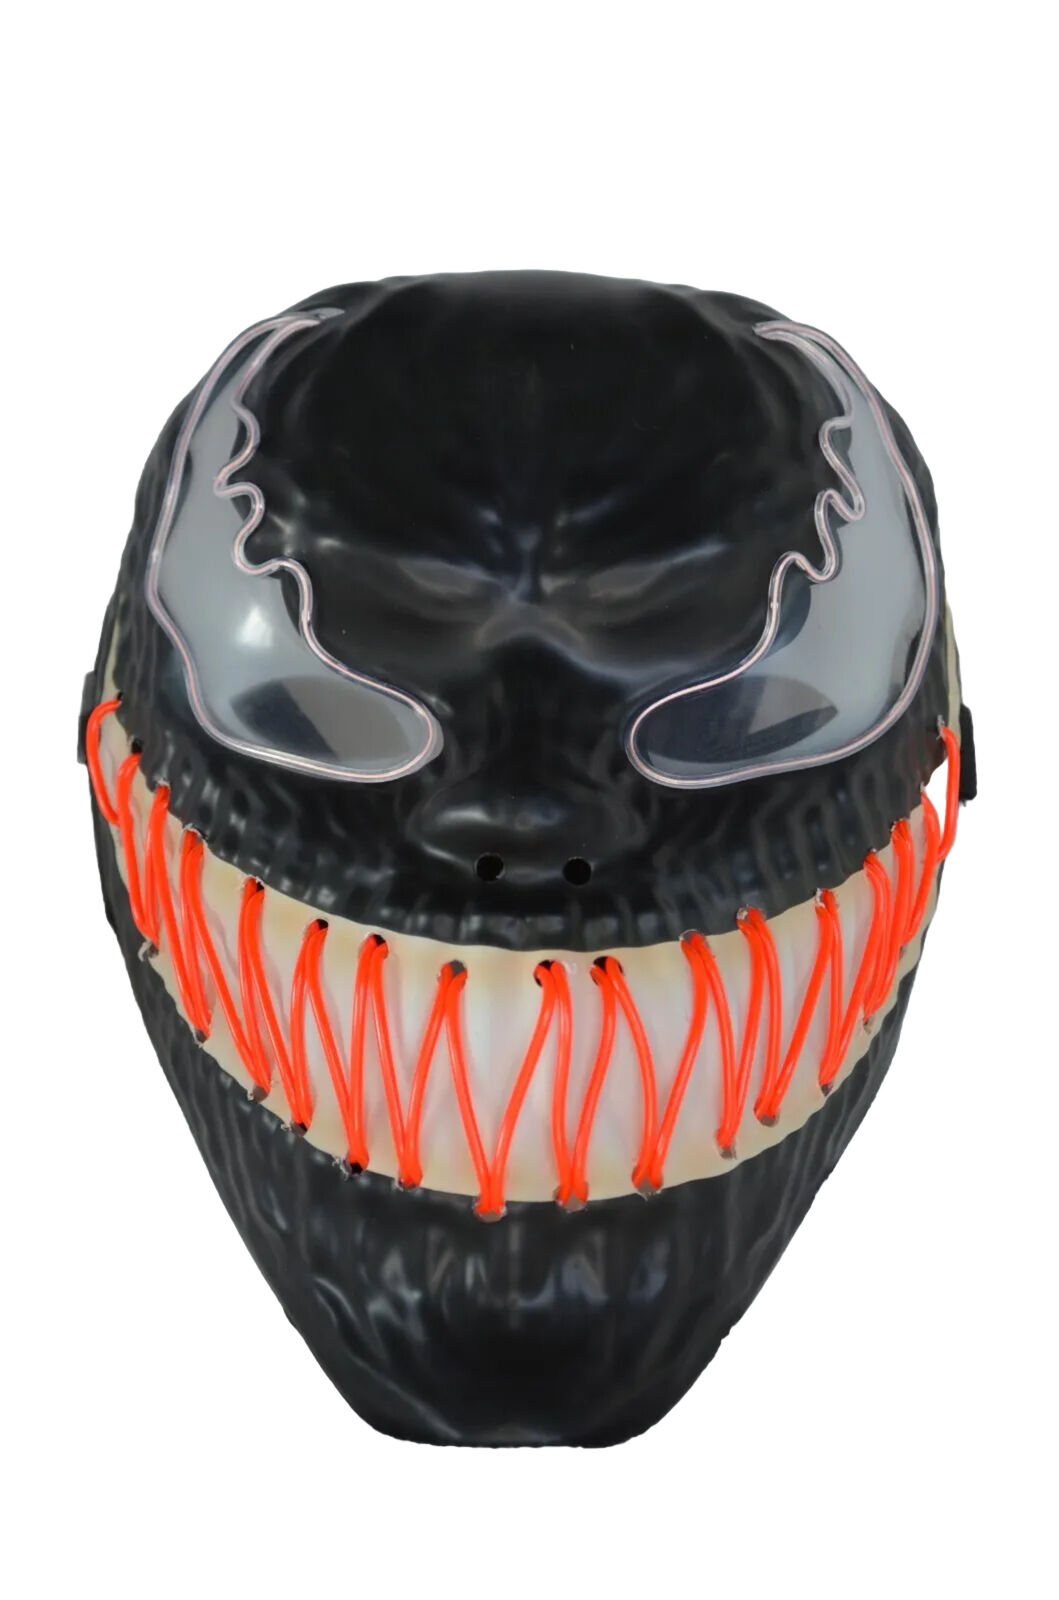 Purge LED Mask For Festival Halloween Scary Party Costume Cosplay Glow Light-up